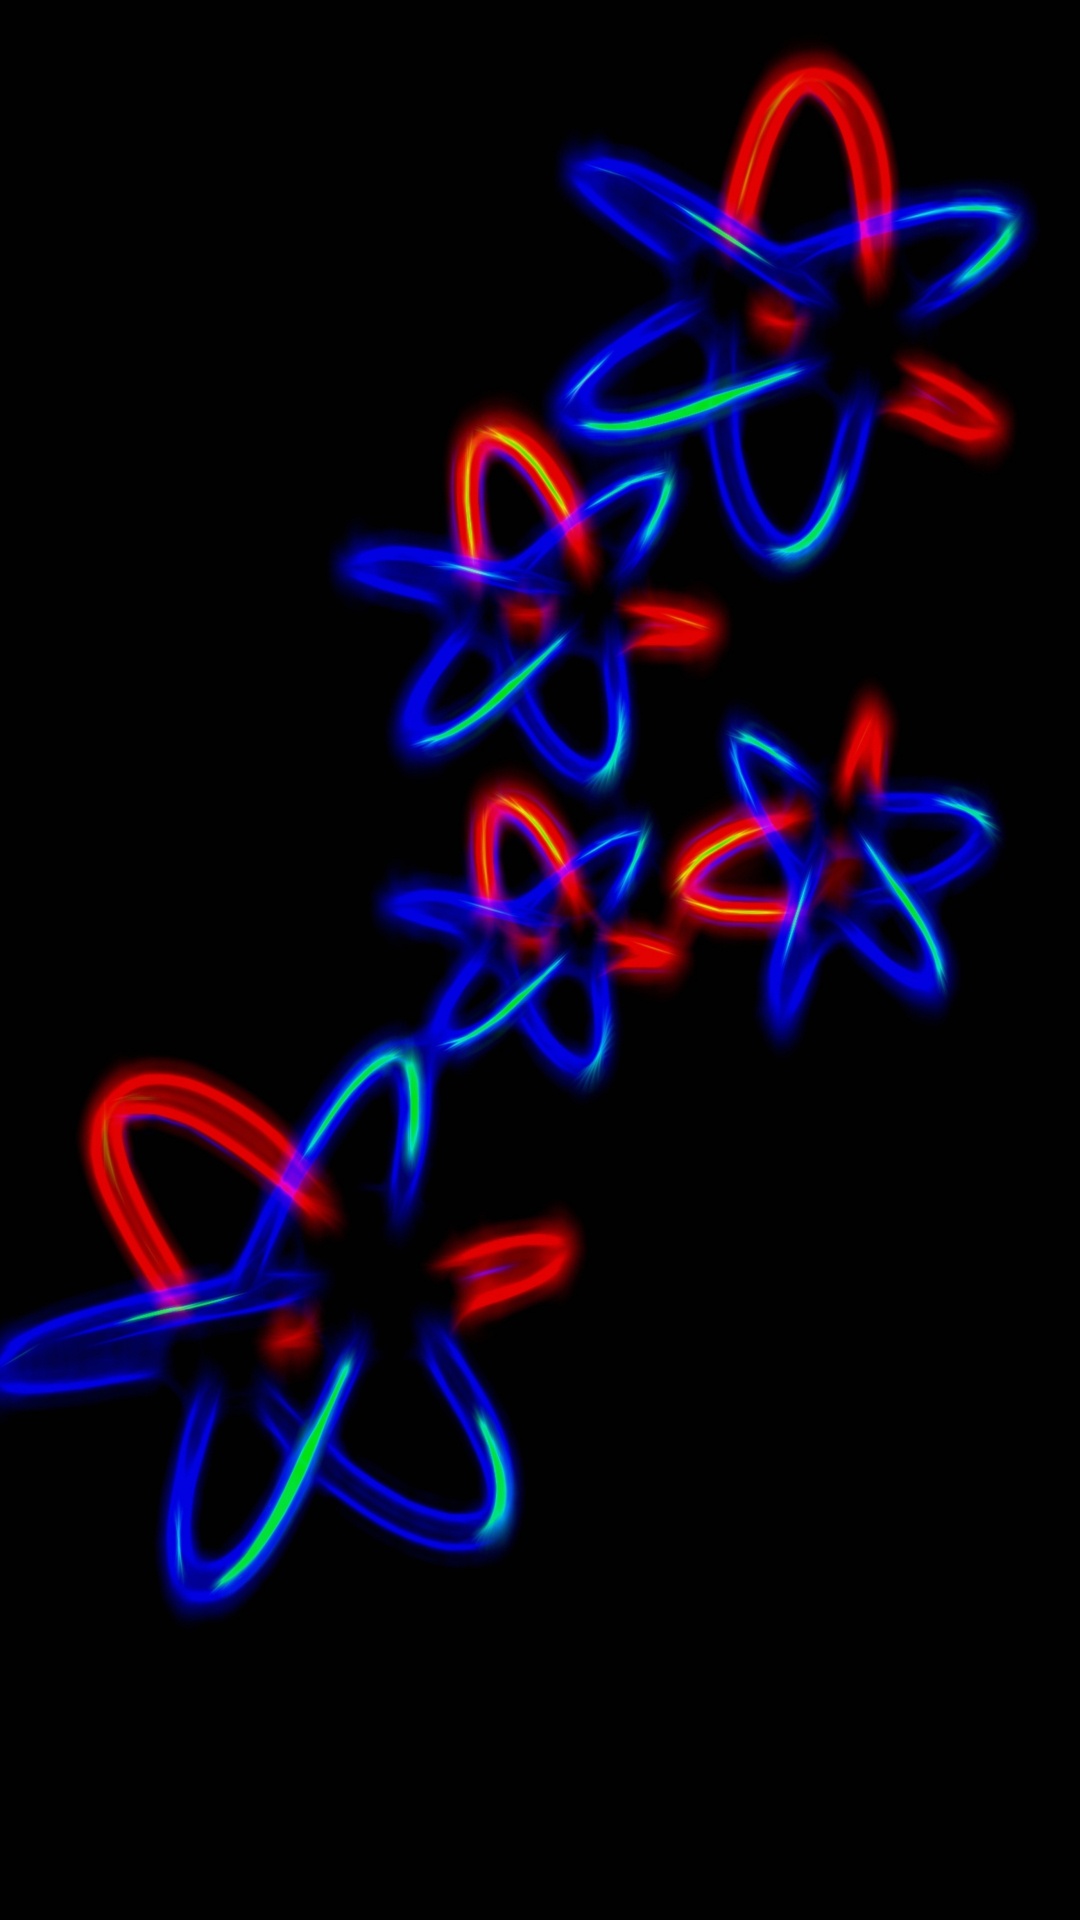 Red Blue and Yellow Abstract Illustration. Wallpaper in 1080x1920 Resolution